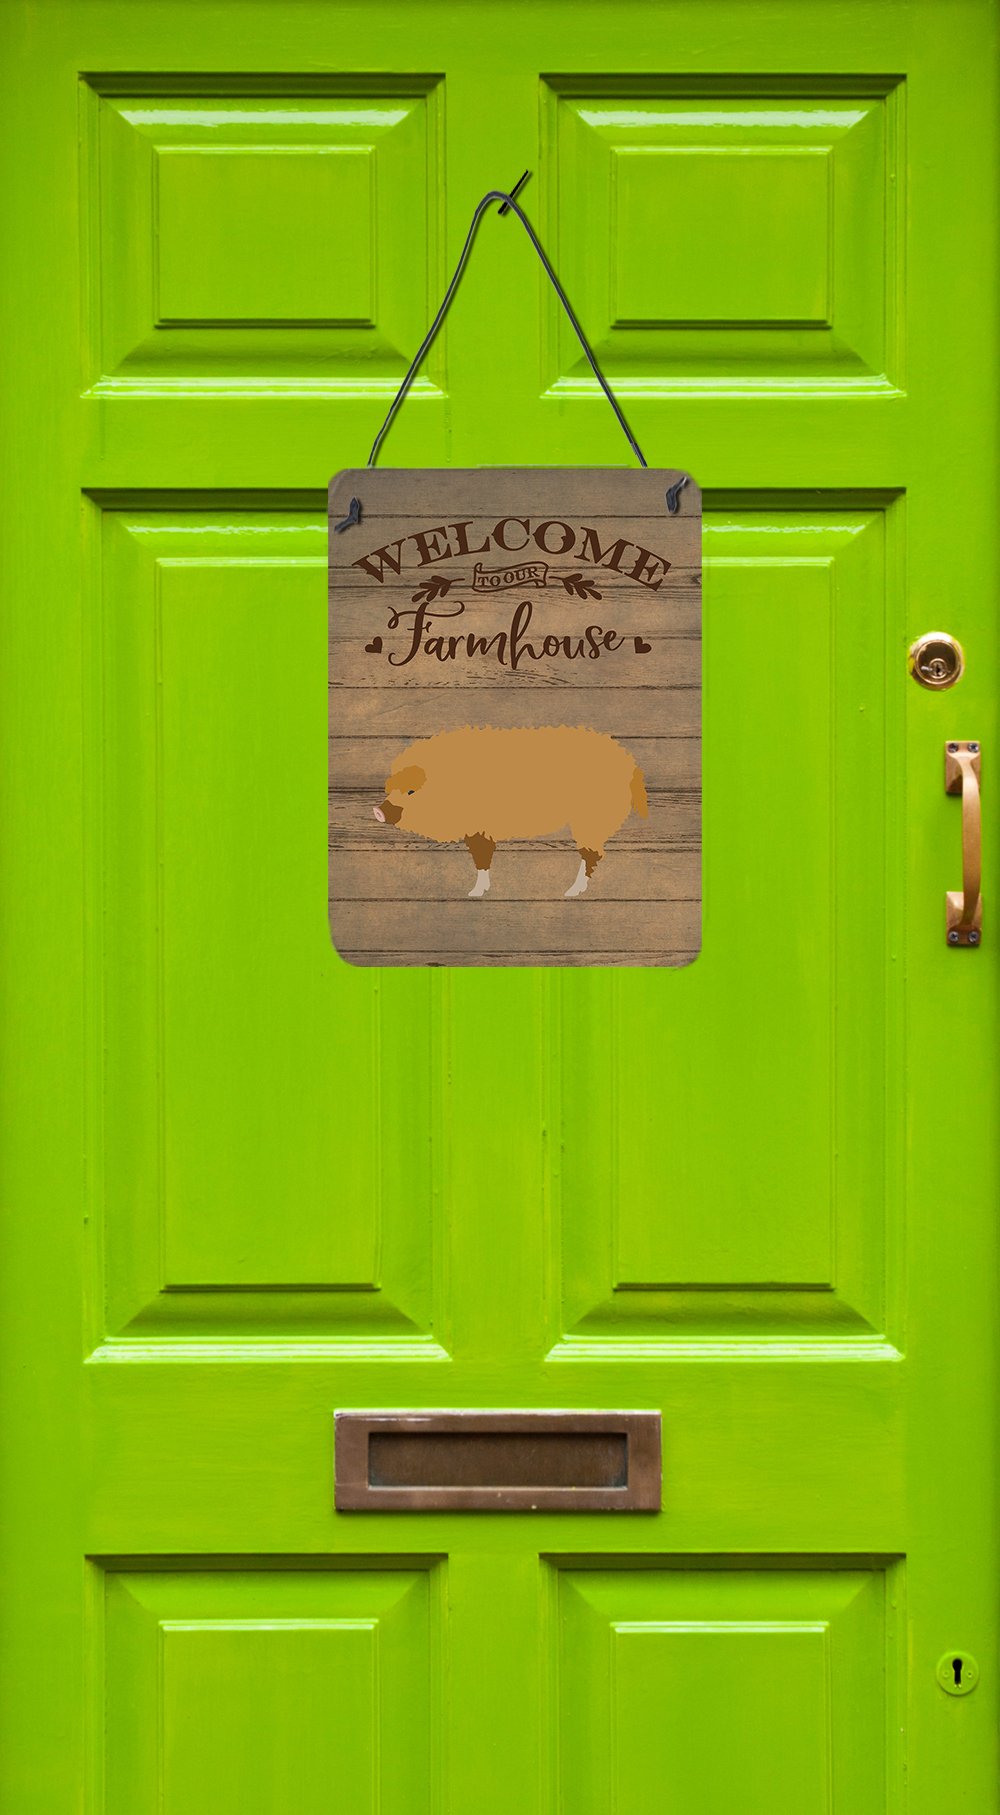 Hungarian Mangalica Pig Welcome Wall or Door Hanging Prints CK6878DS1216 by Caroline's Treasures